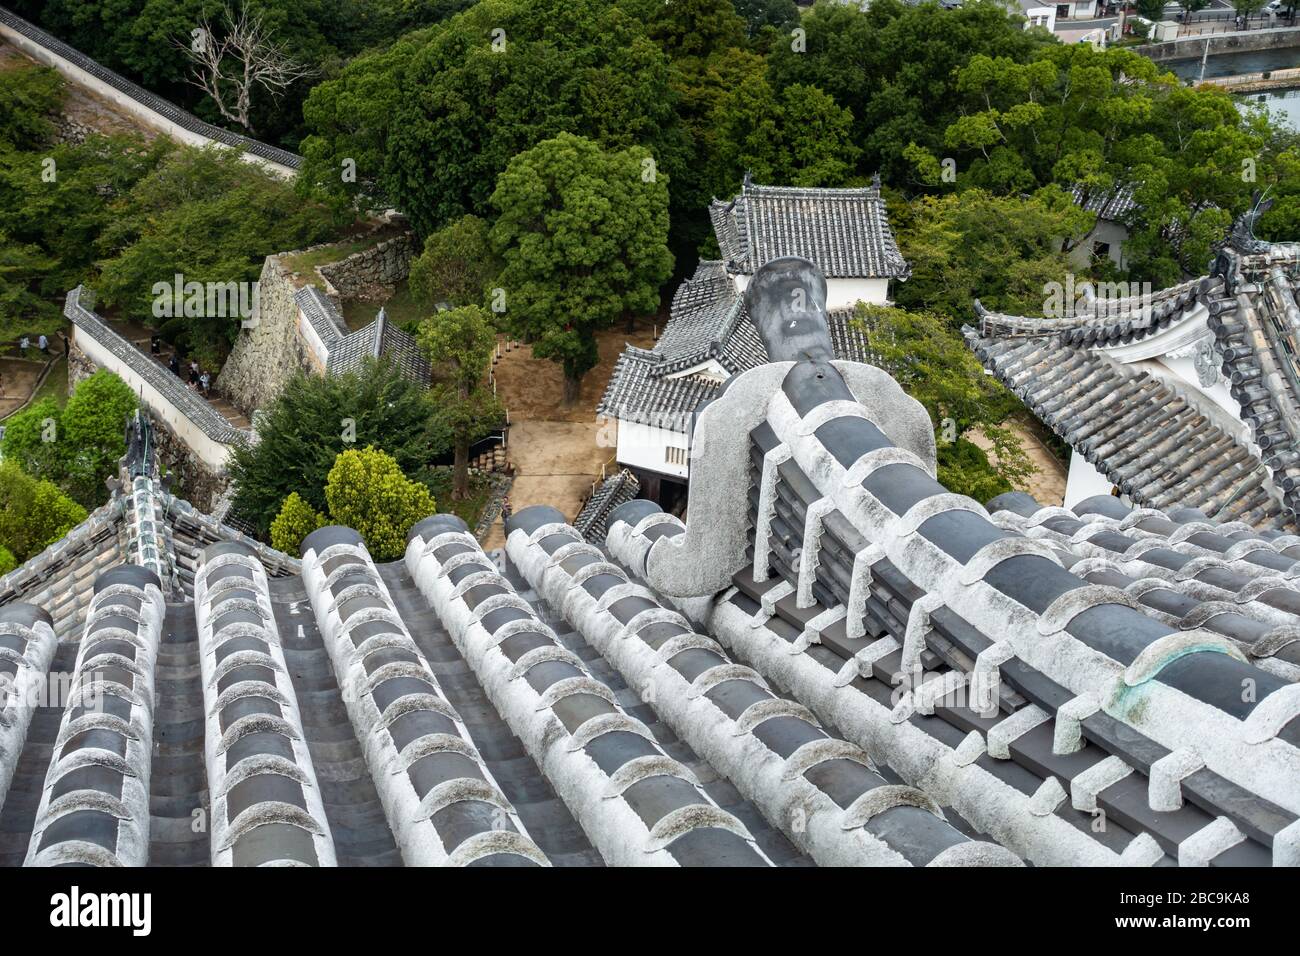 Rooftops detail of Himeji Castle, regarded as the finest surviving example of prototypical Japanese castle architecture Stock Photo